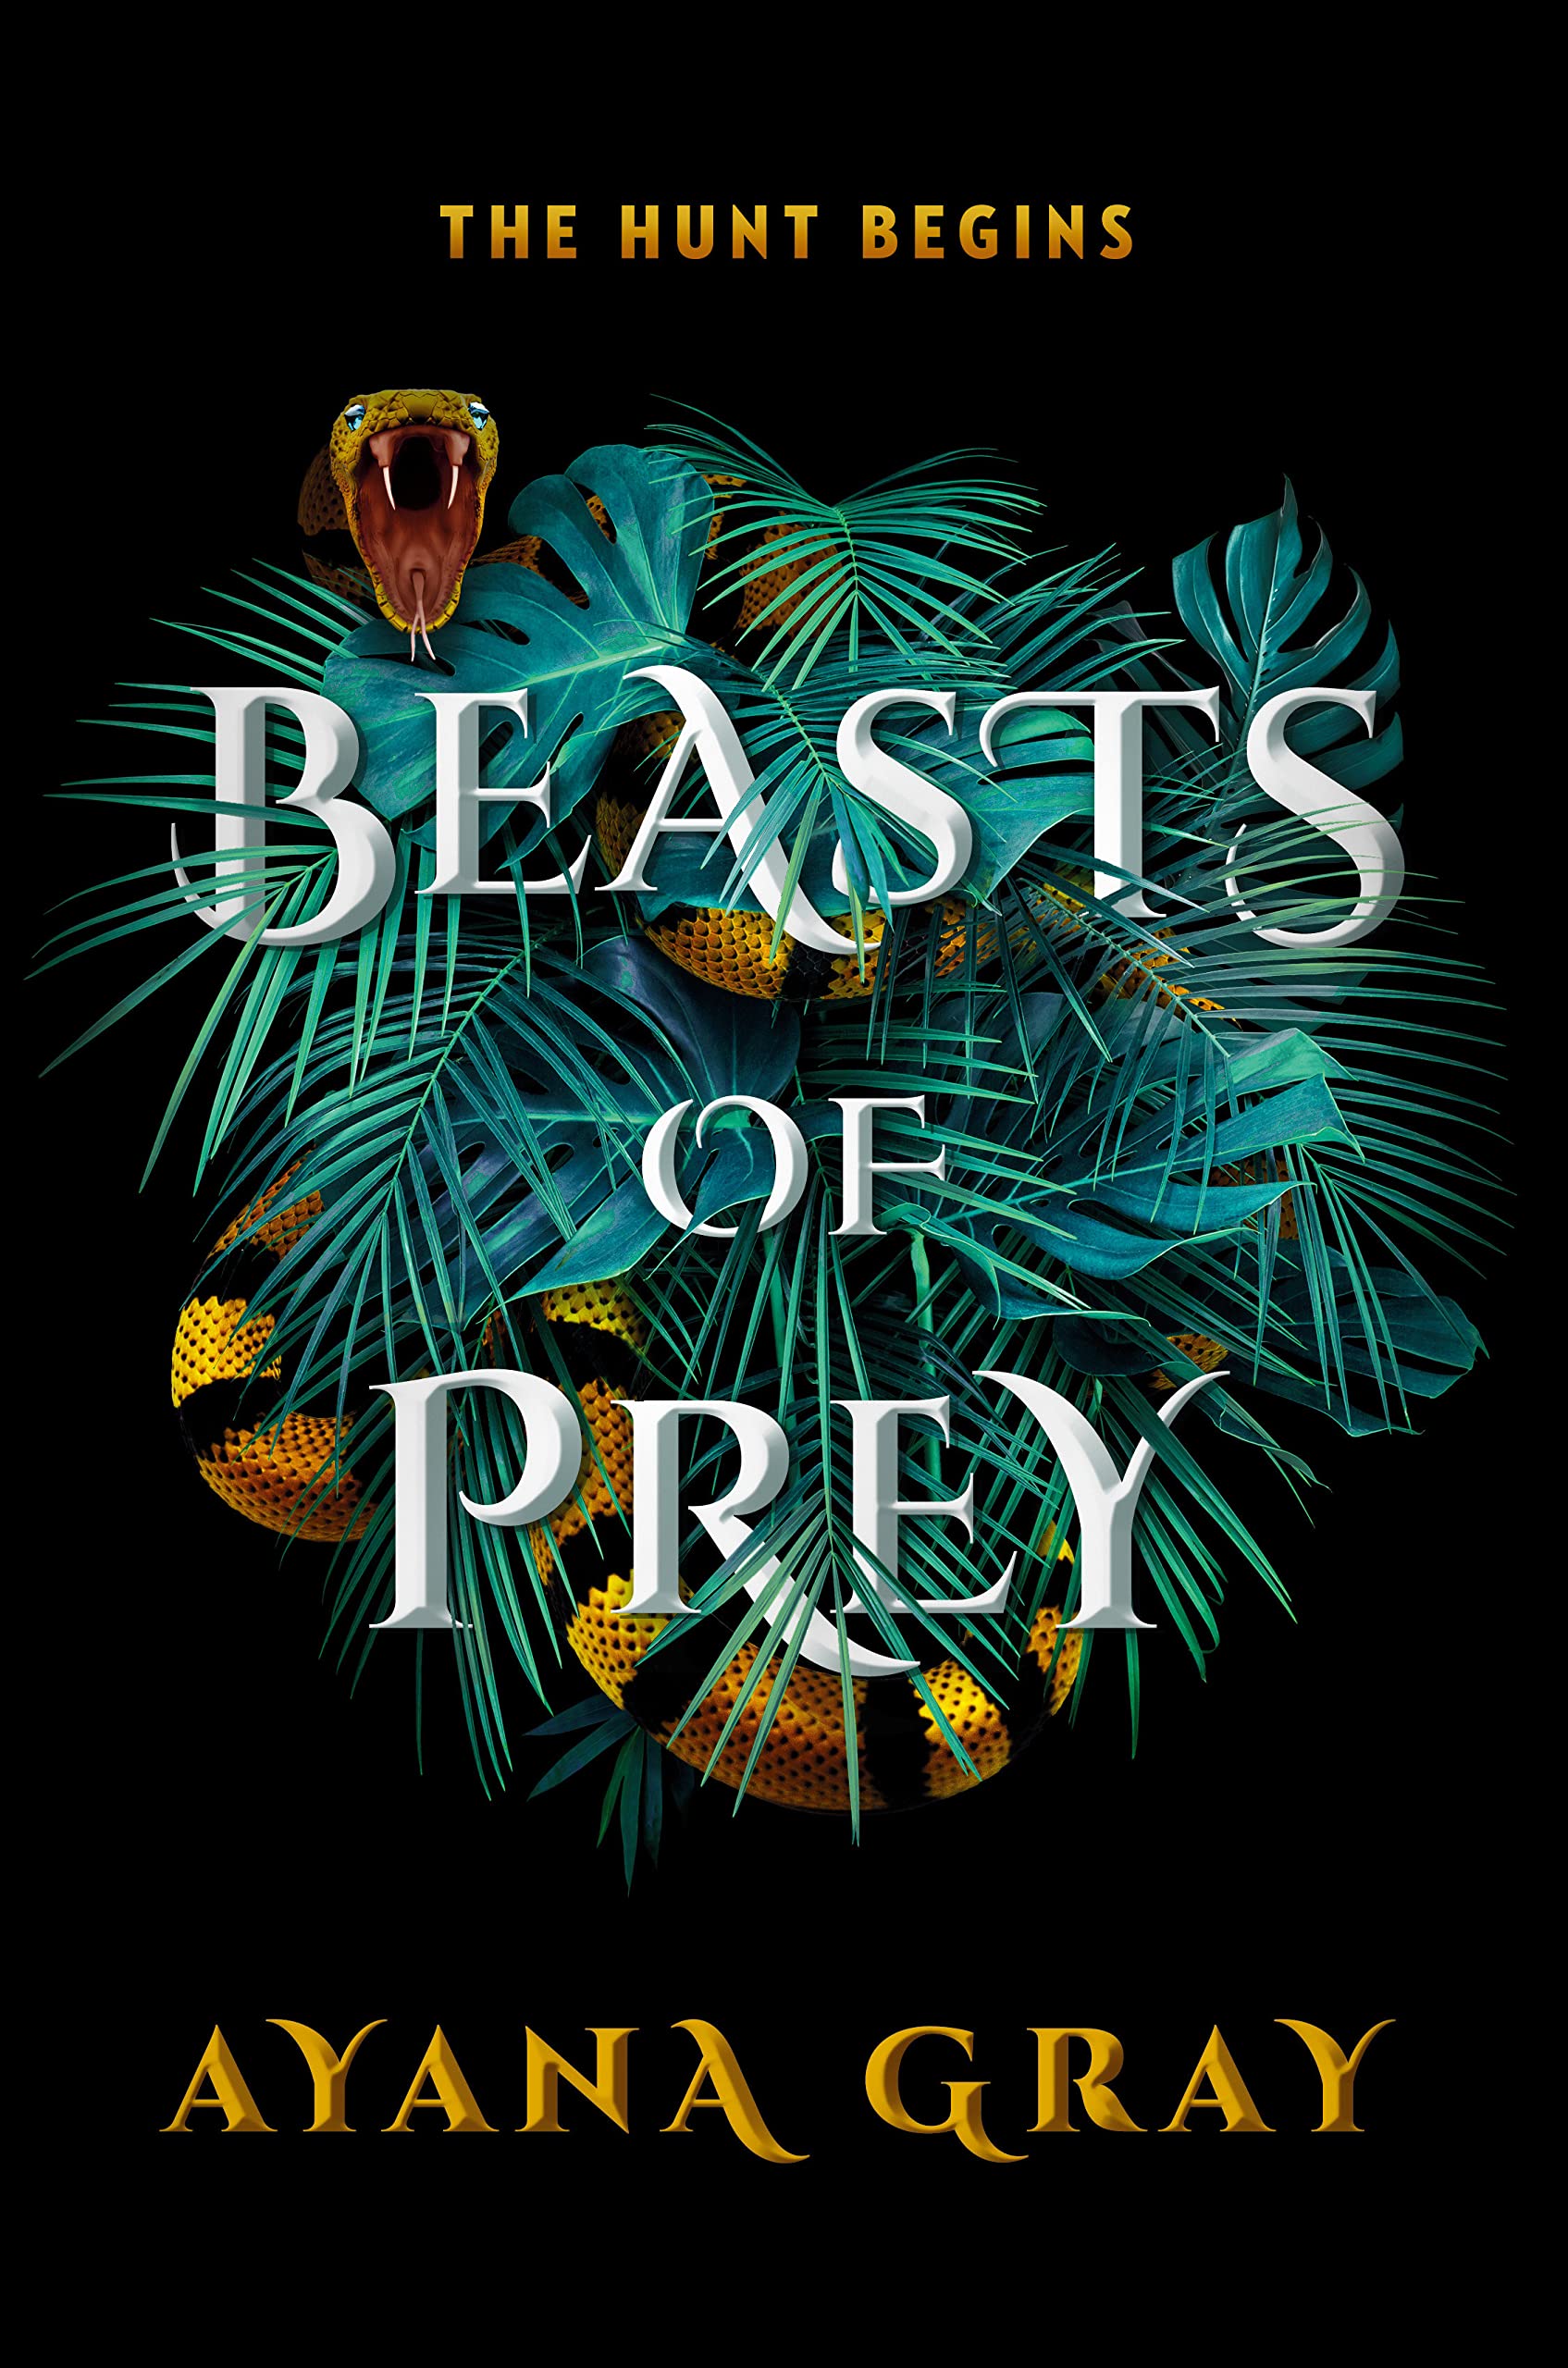 Beasts of Prey book cover